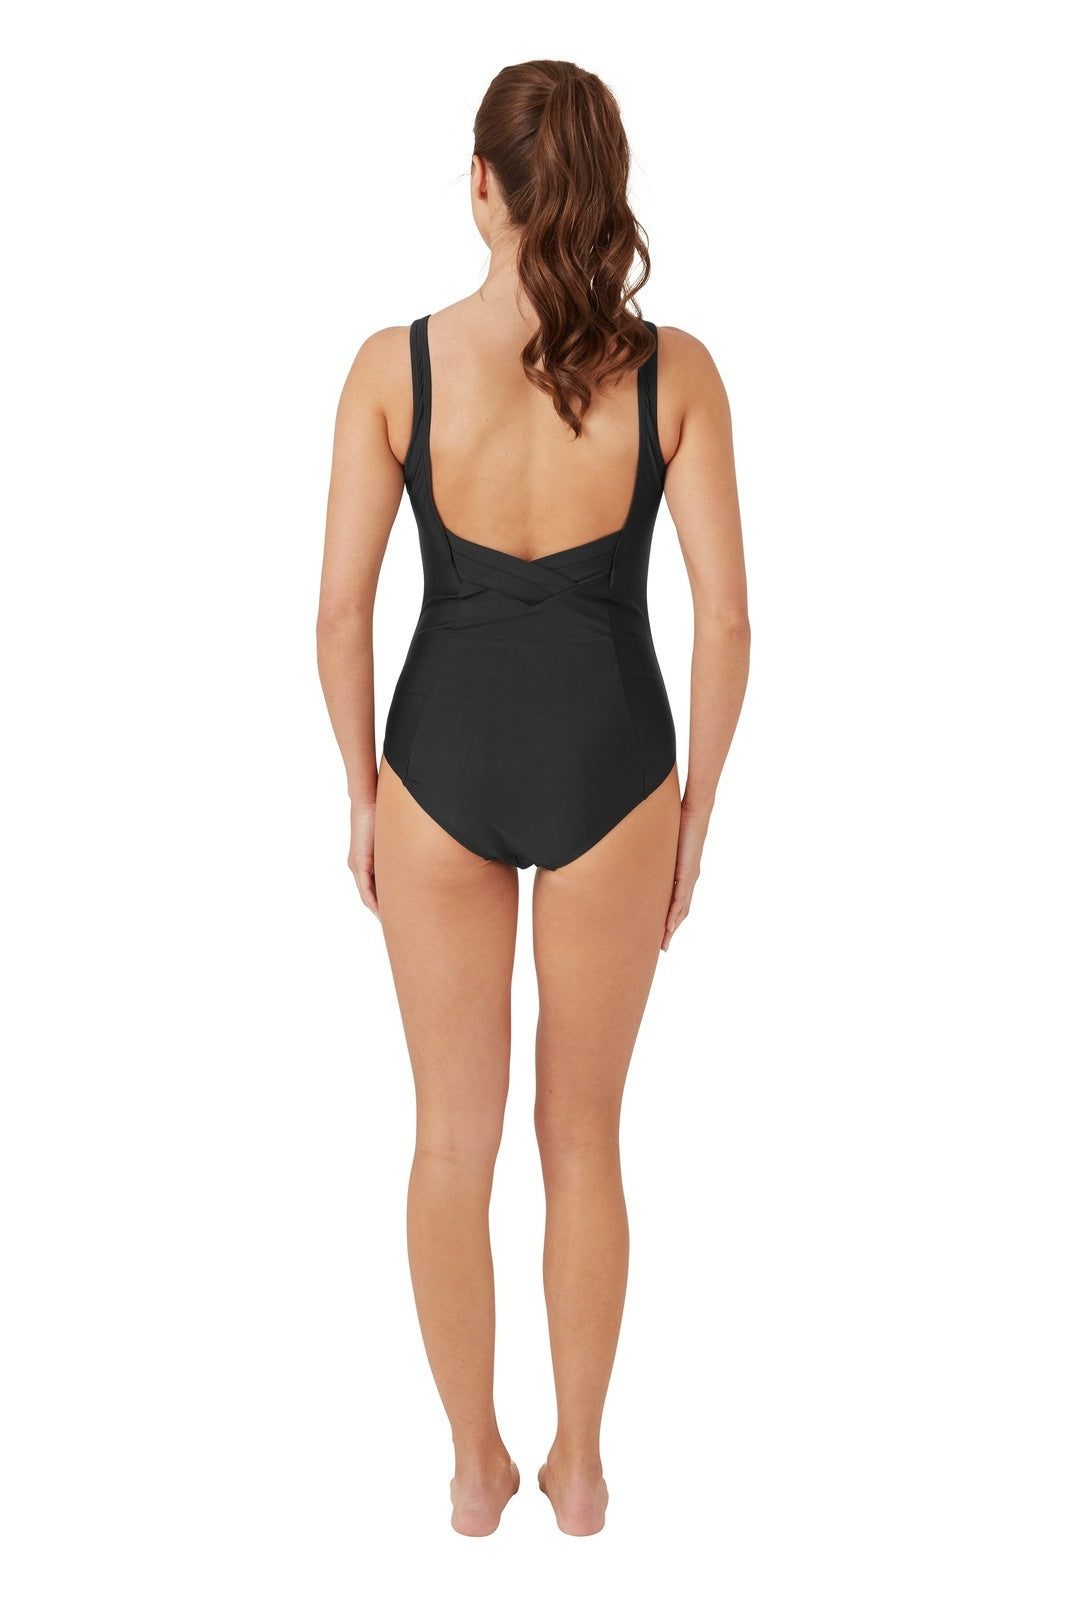 Oyster Bay Plain Pleated Swimsuit - Black 3 Shaws Department Stores